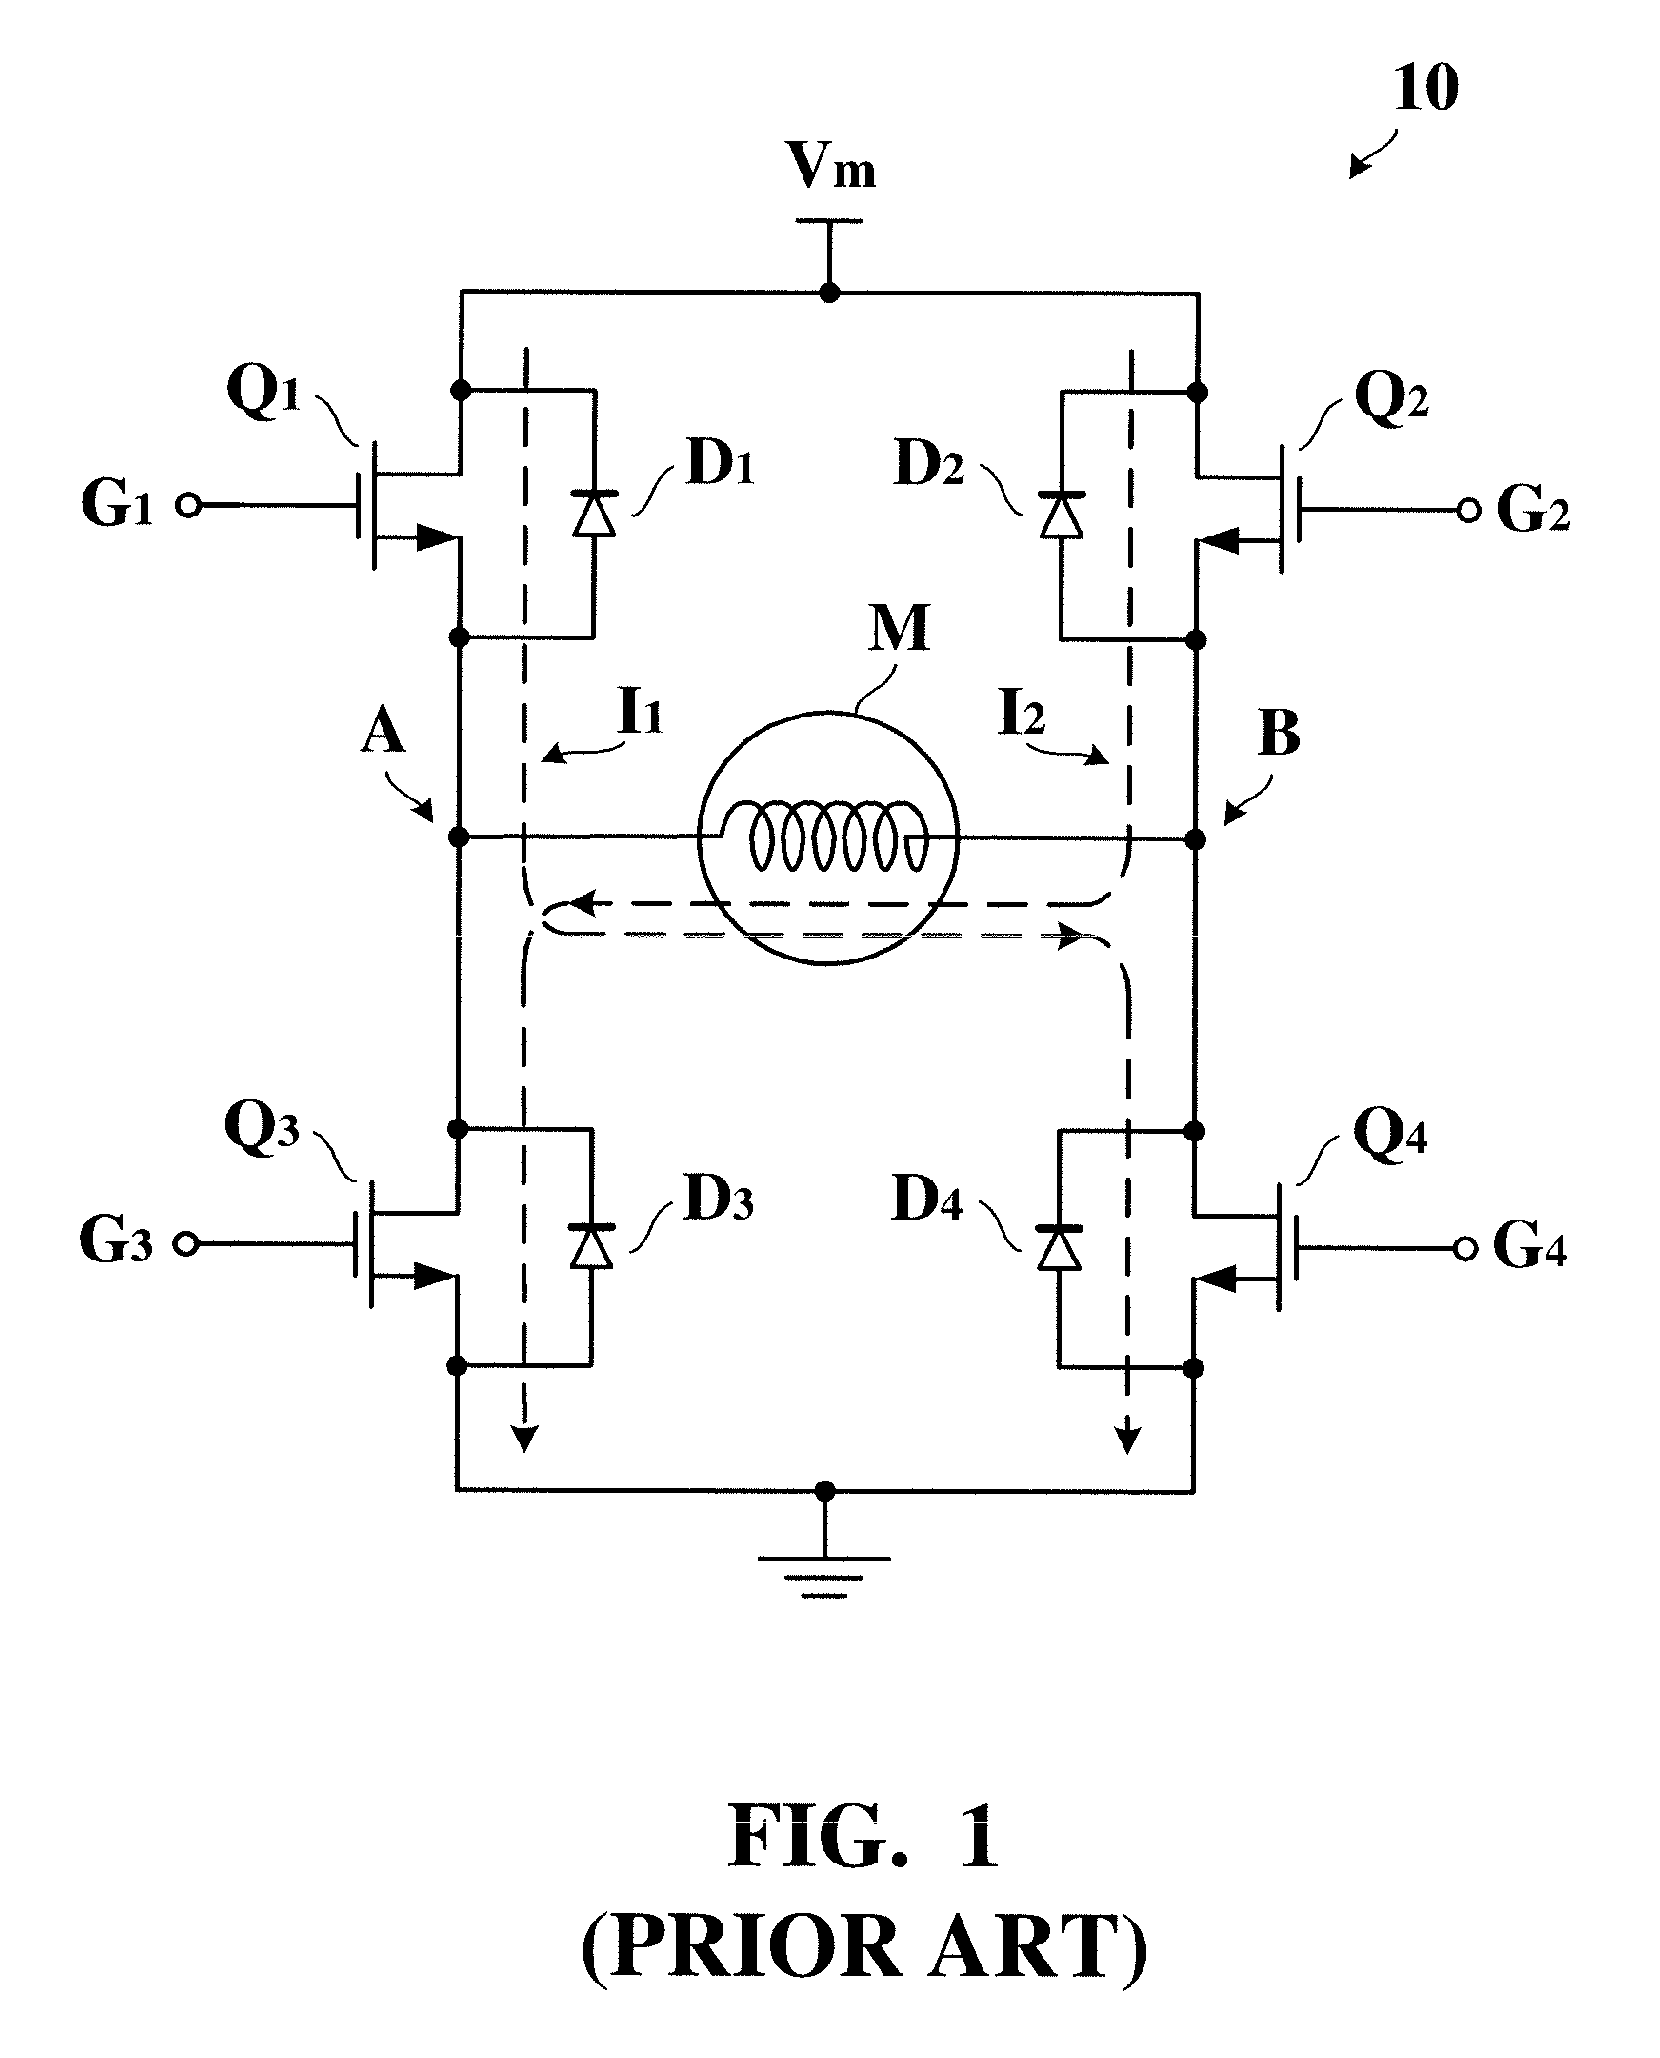 Motor control circuit for supplying a controllable driving voltage